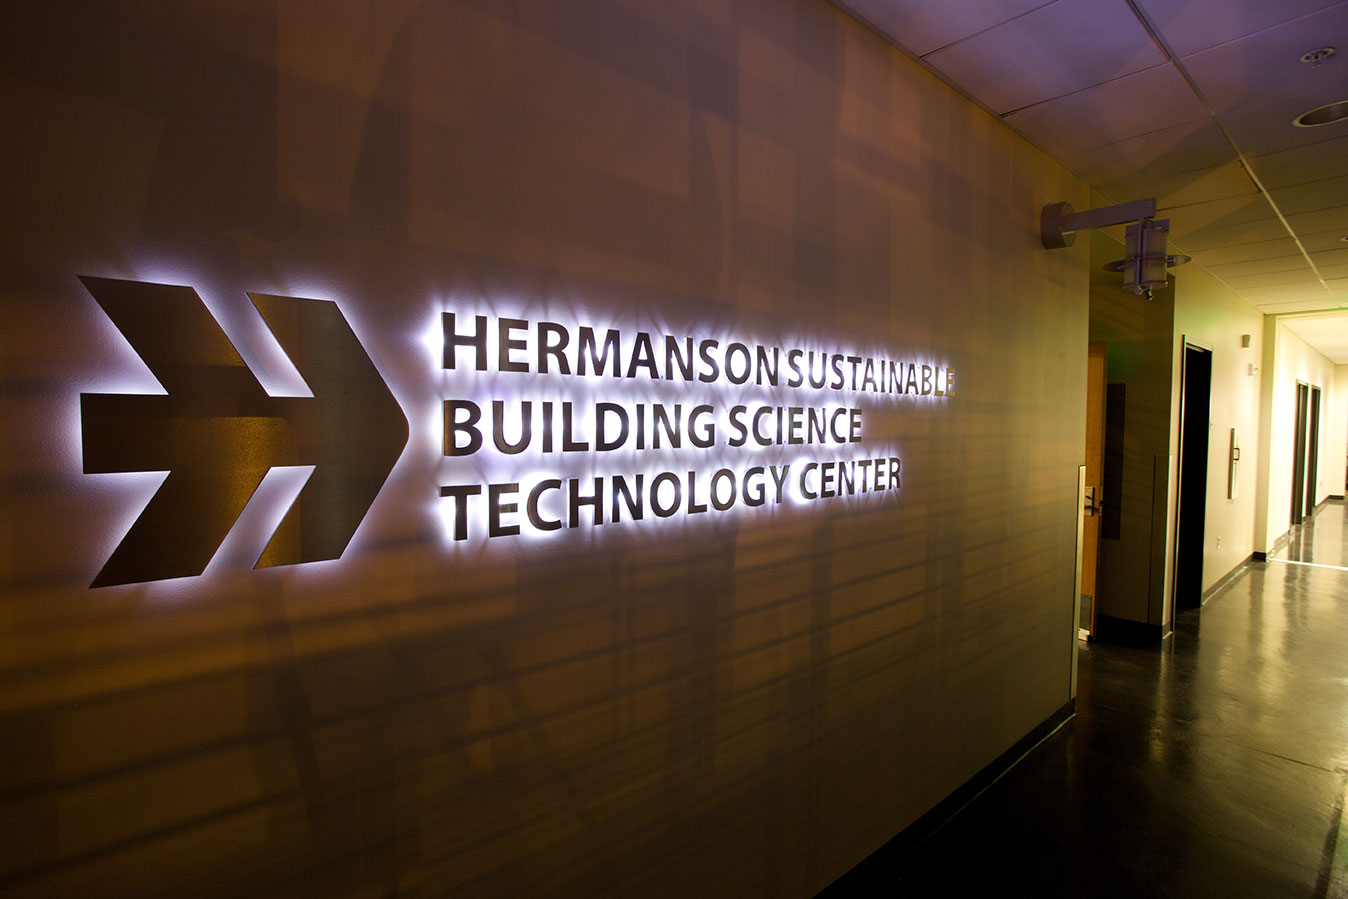 Hermanson Sustainable Building Science Technology Center